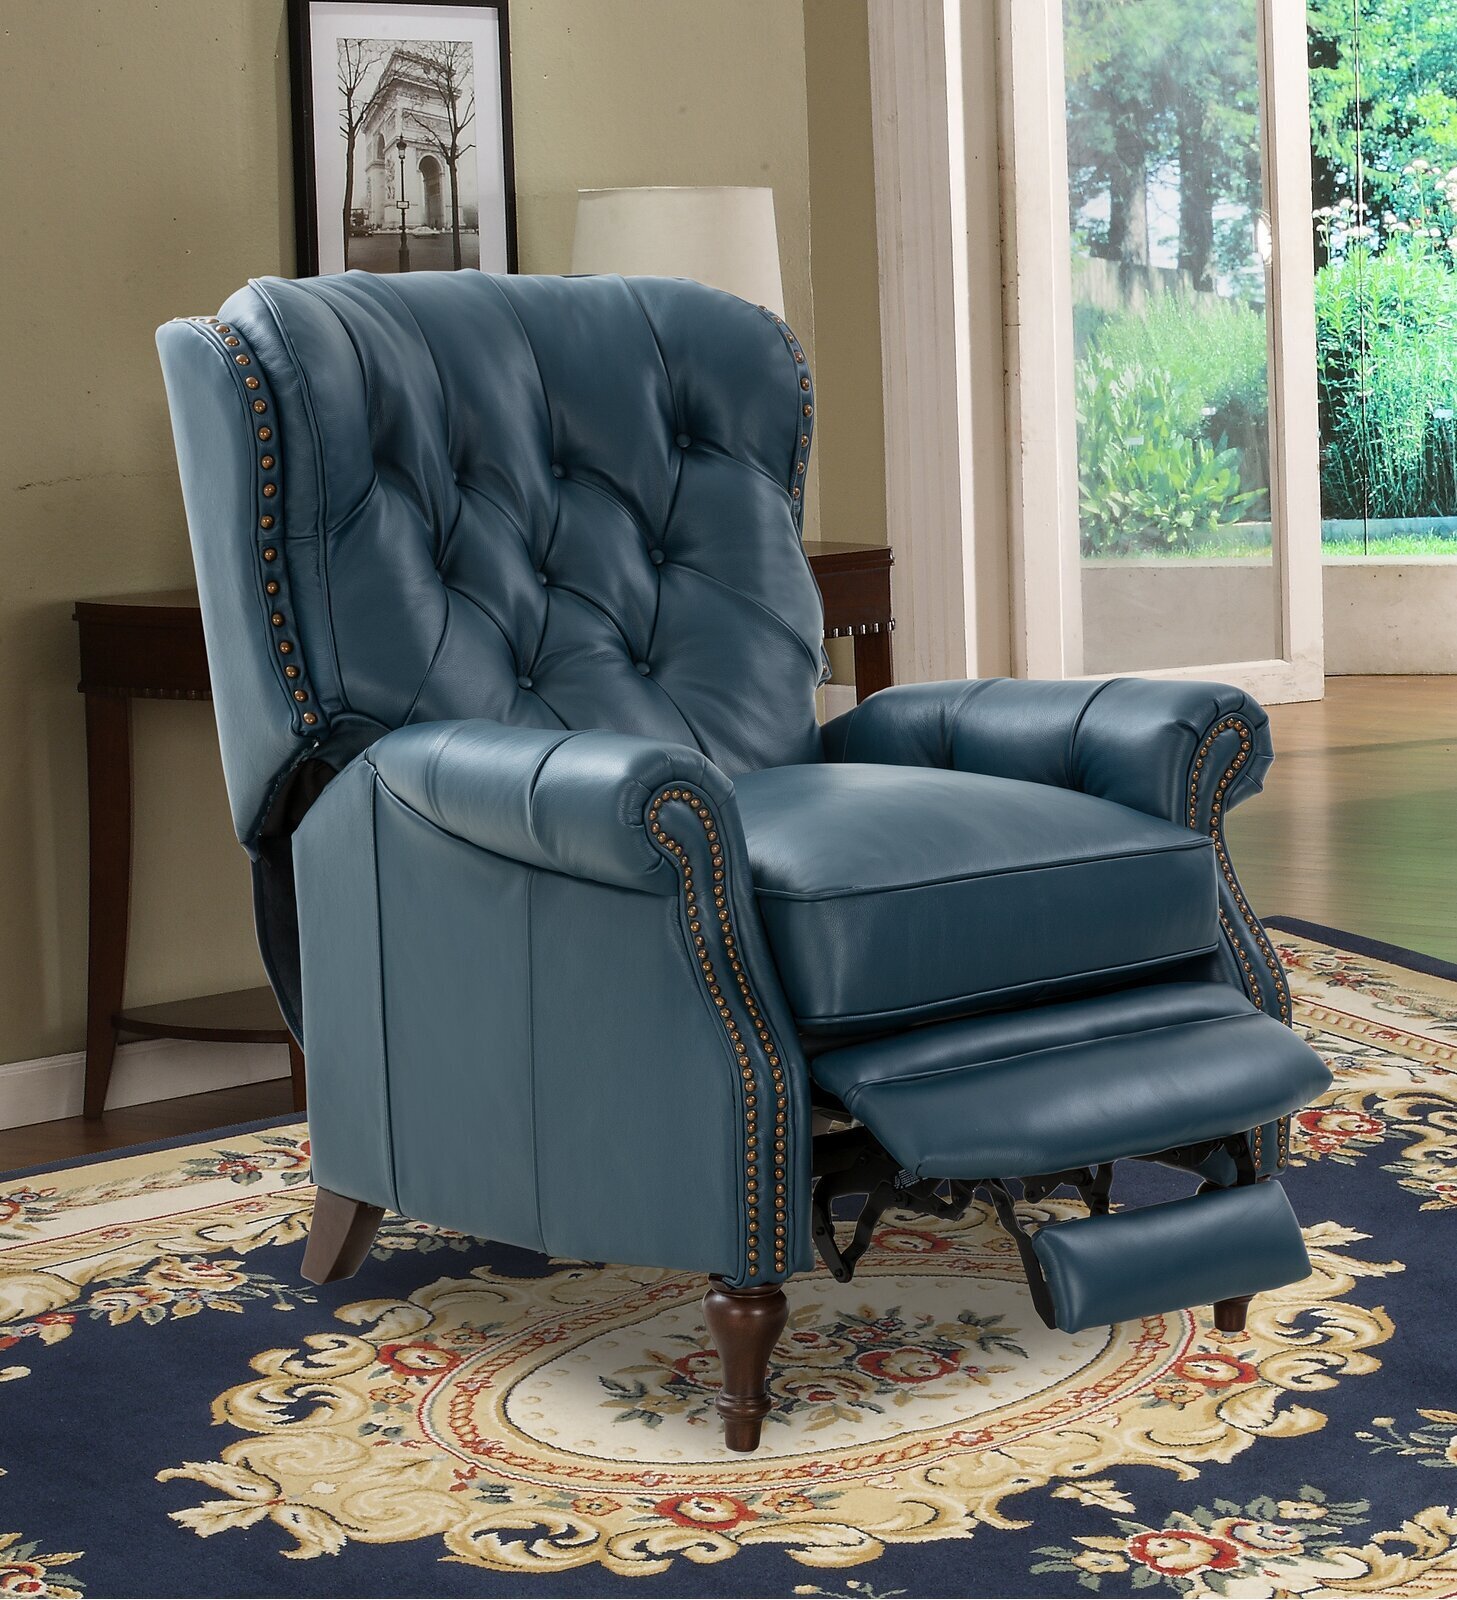 Tufted blue leather recliner